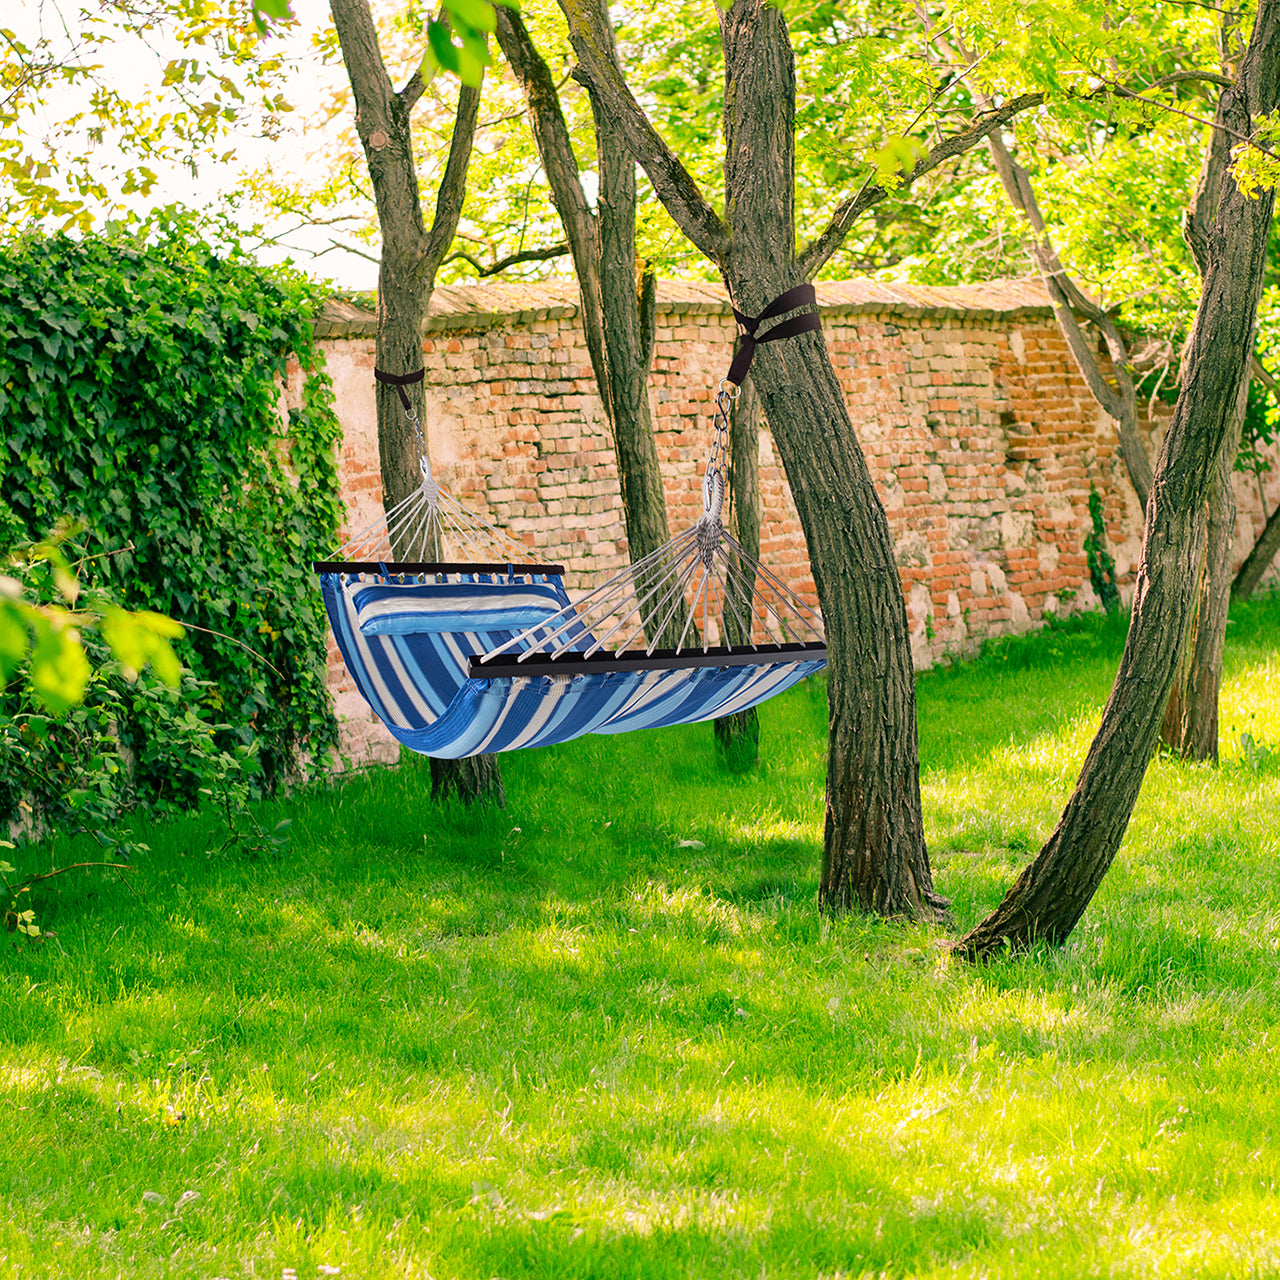 Bliss Hammocks 48-inch Ventaleen Oversized Hammock with Pillow and Spreader Bars in the ocean blue variation hanging outside between two trees.